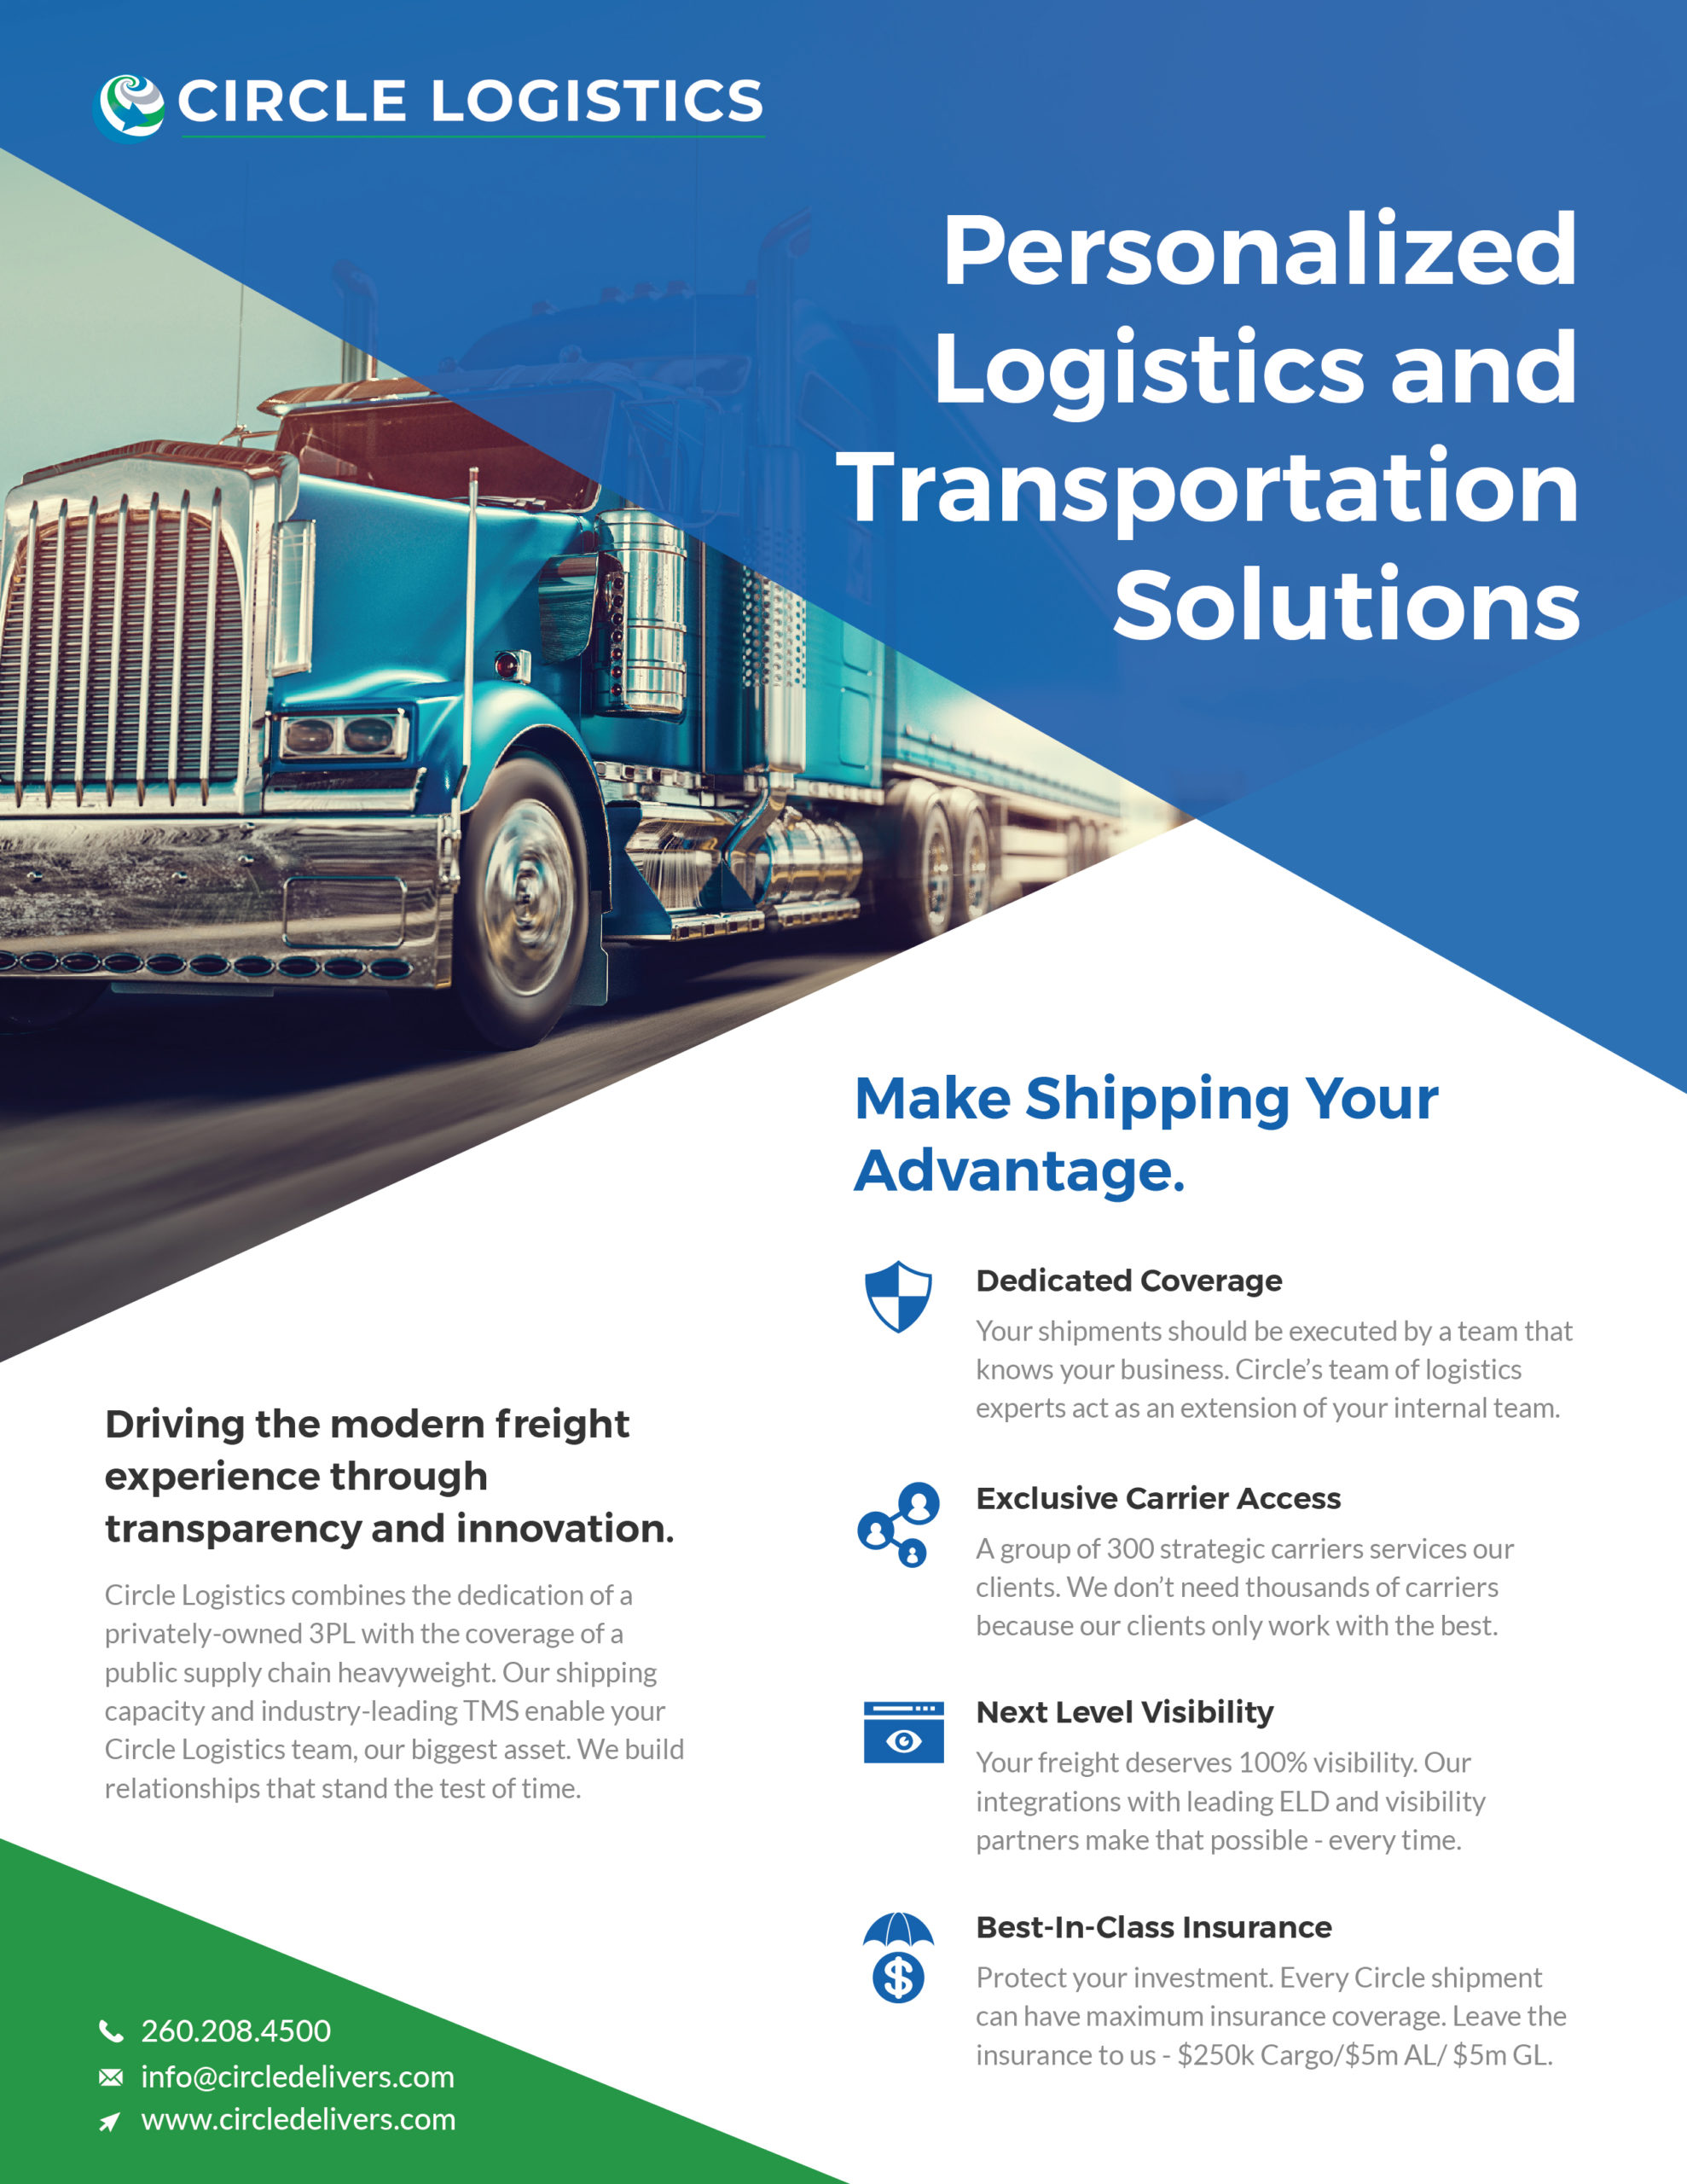 Circle Logistics Overview of Personalized Logistics and Transportation Solutions page 1